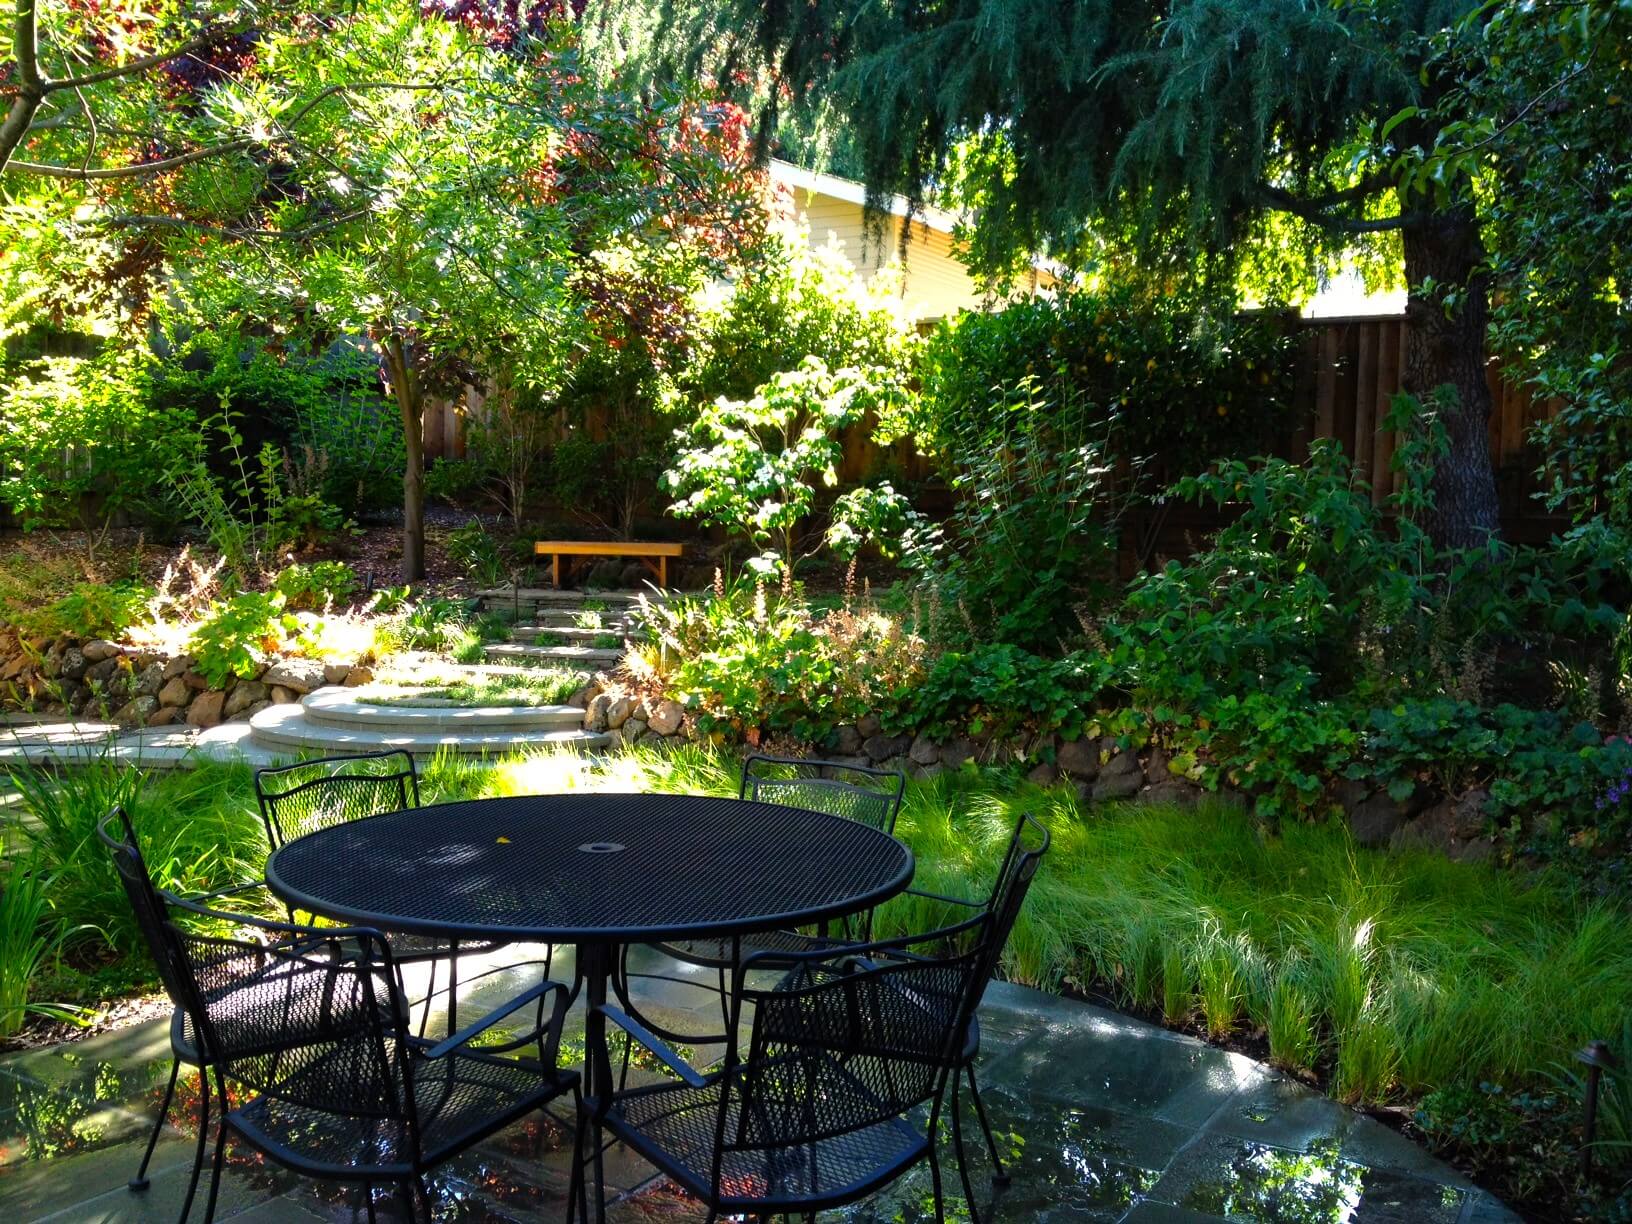 Shaded backyard patio with hidden seating area in background